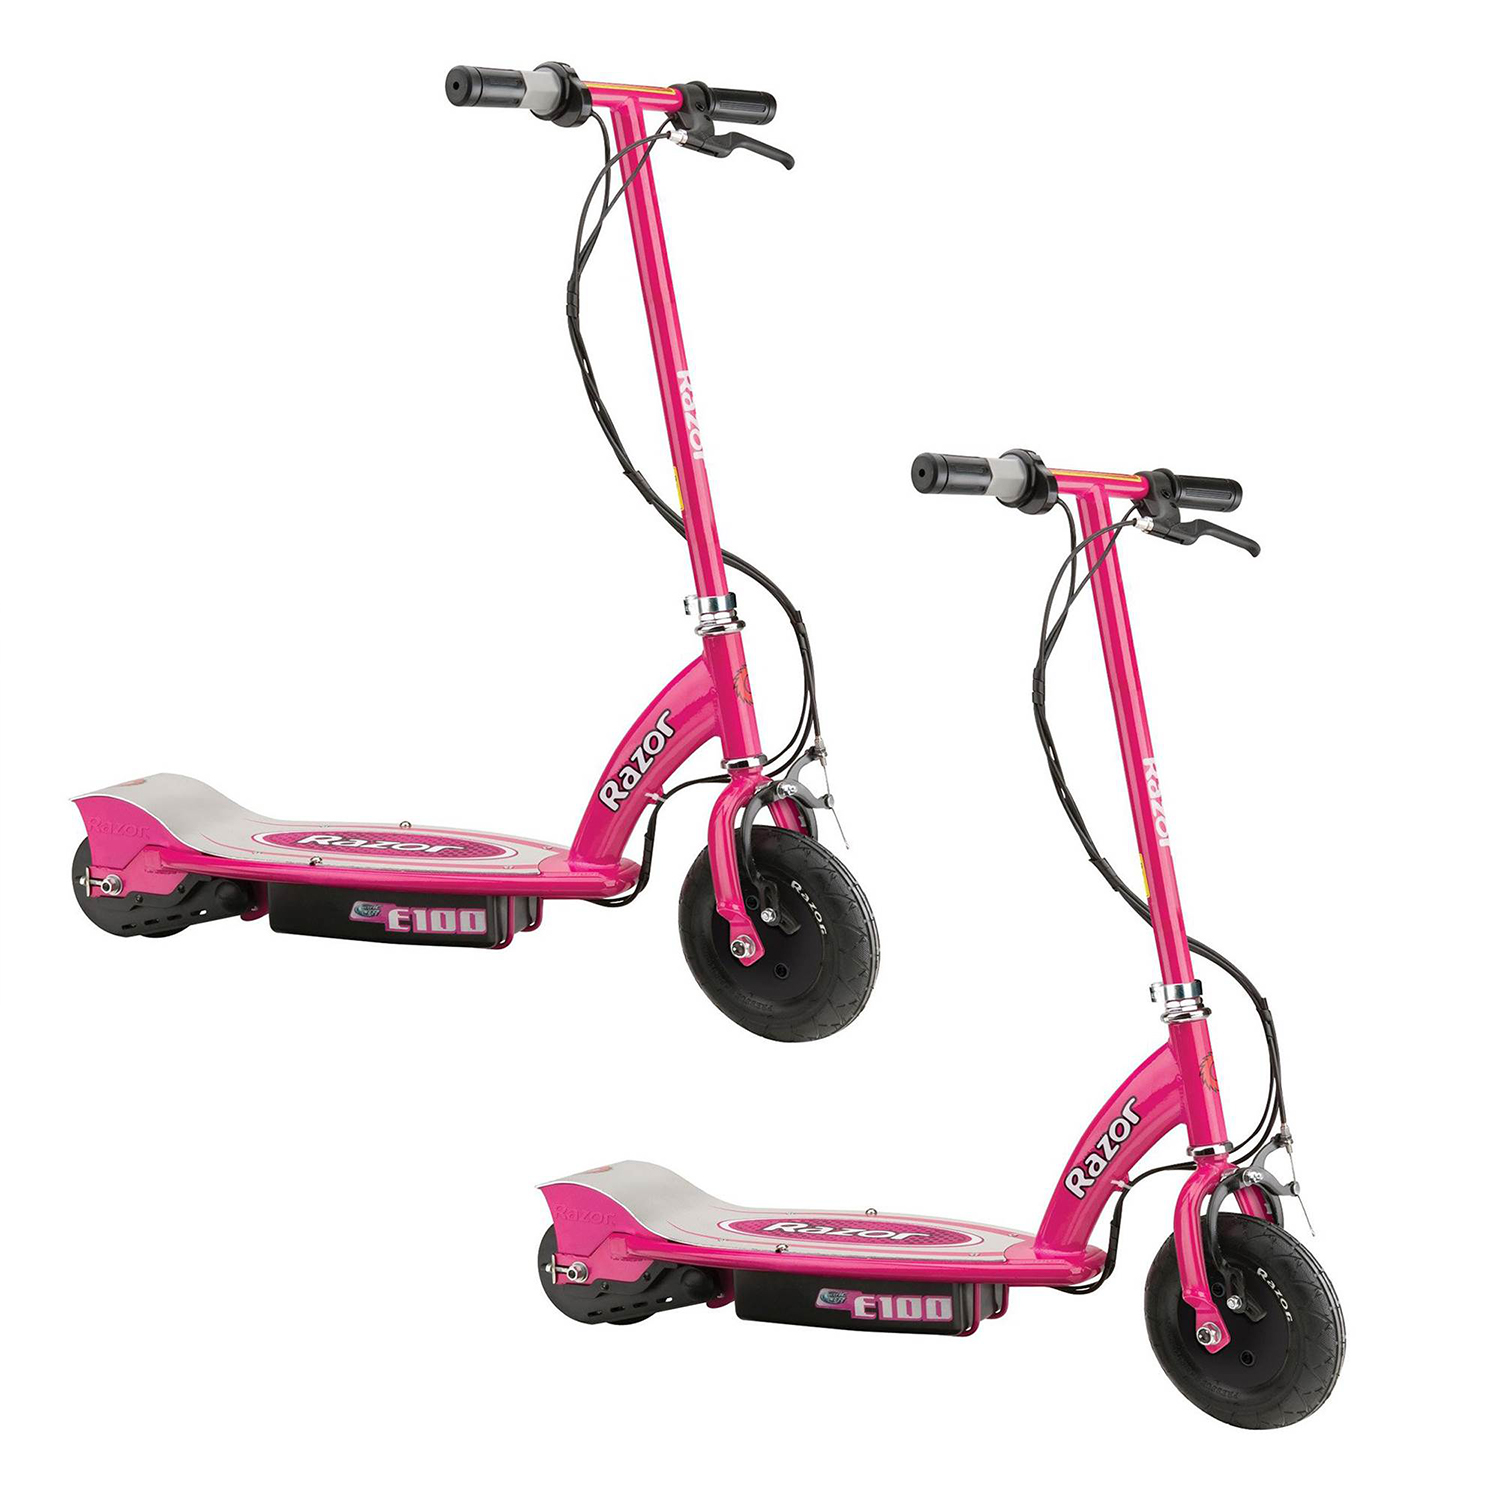 electric ride on scooter pink